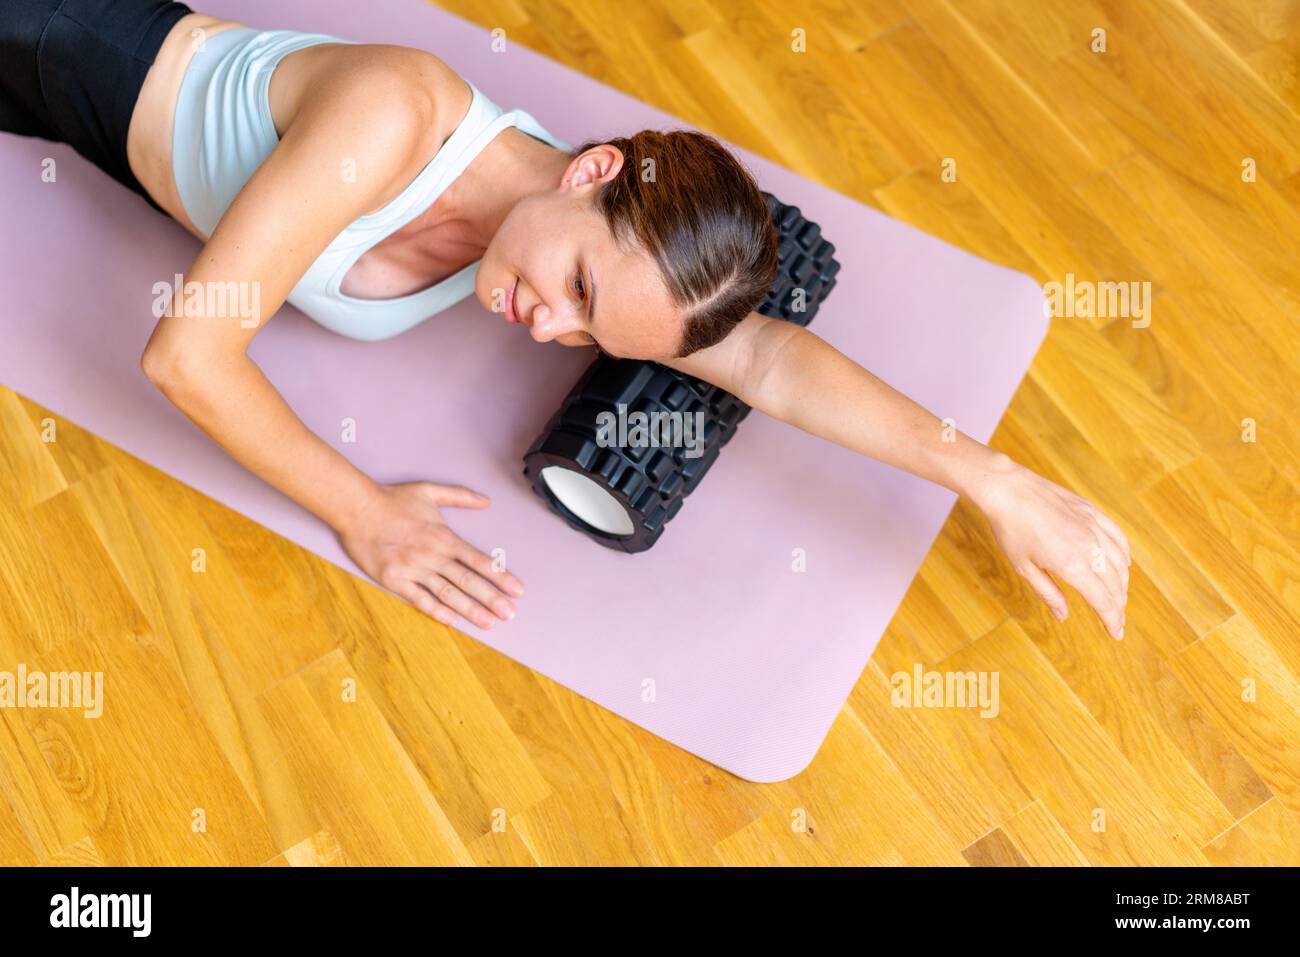 Roman using foam roller for reducing soreness and increasing flexibility of muscles of arms. Stock Photo